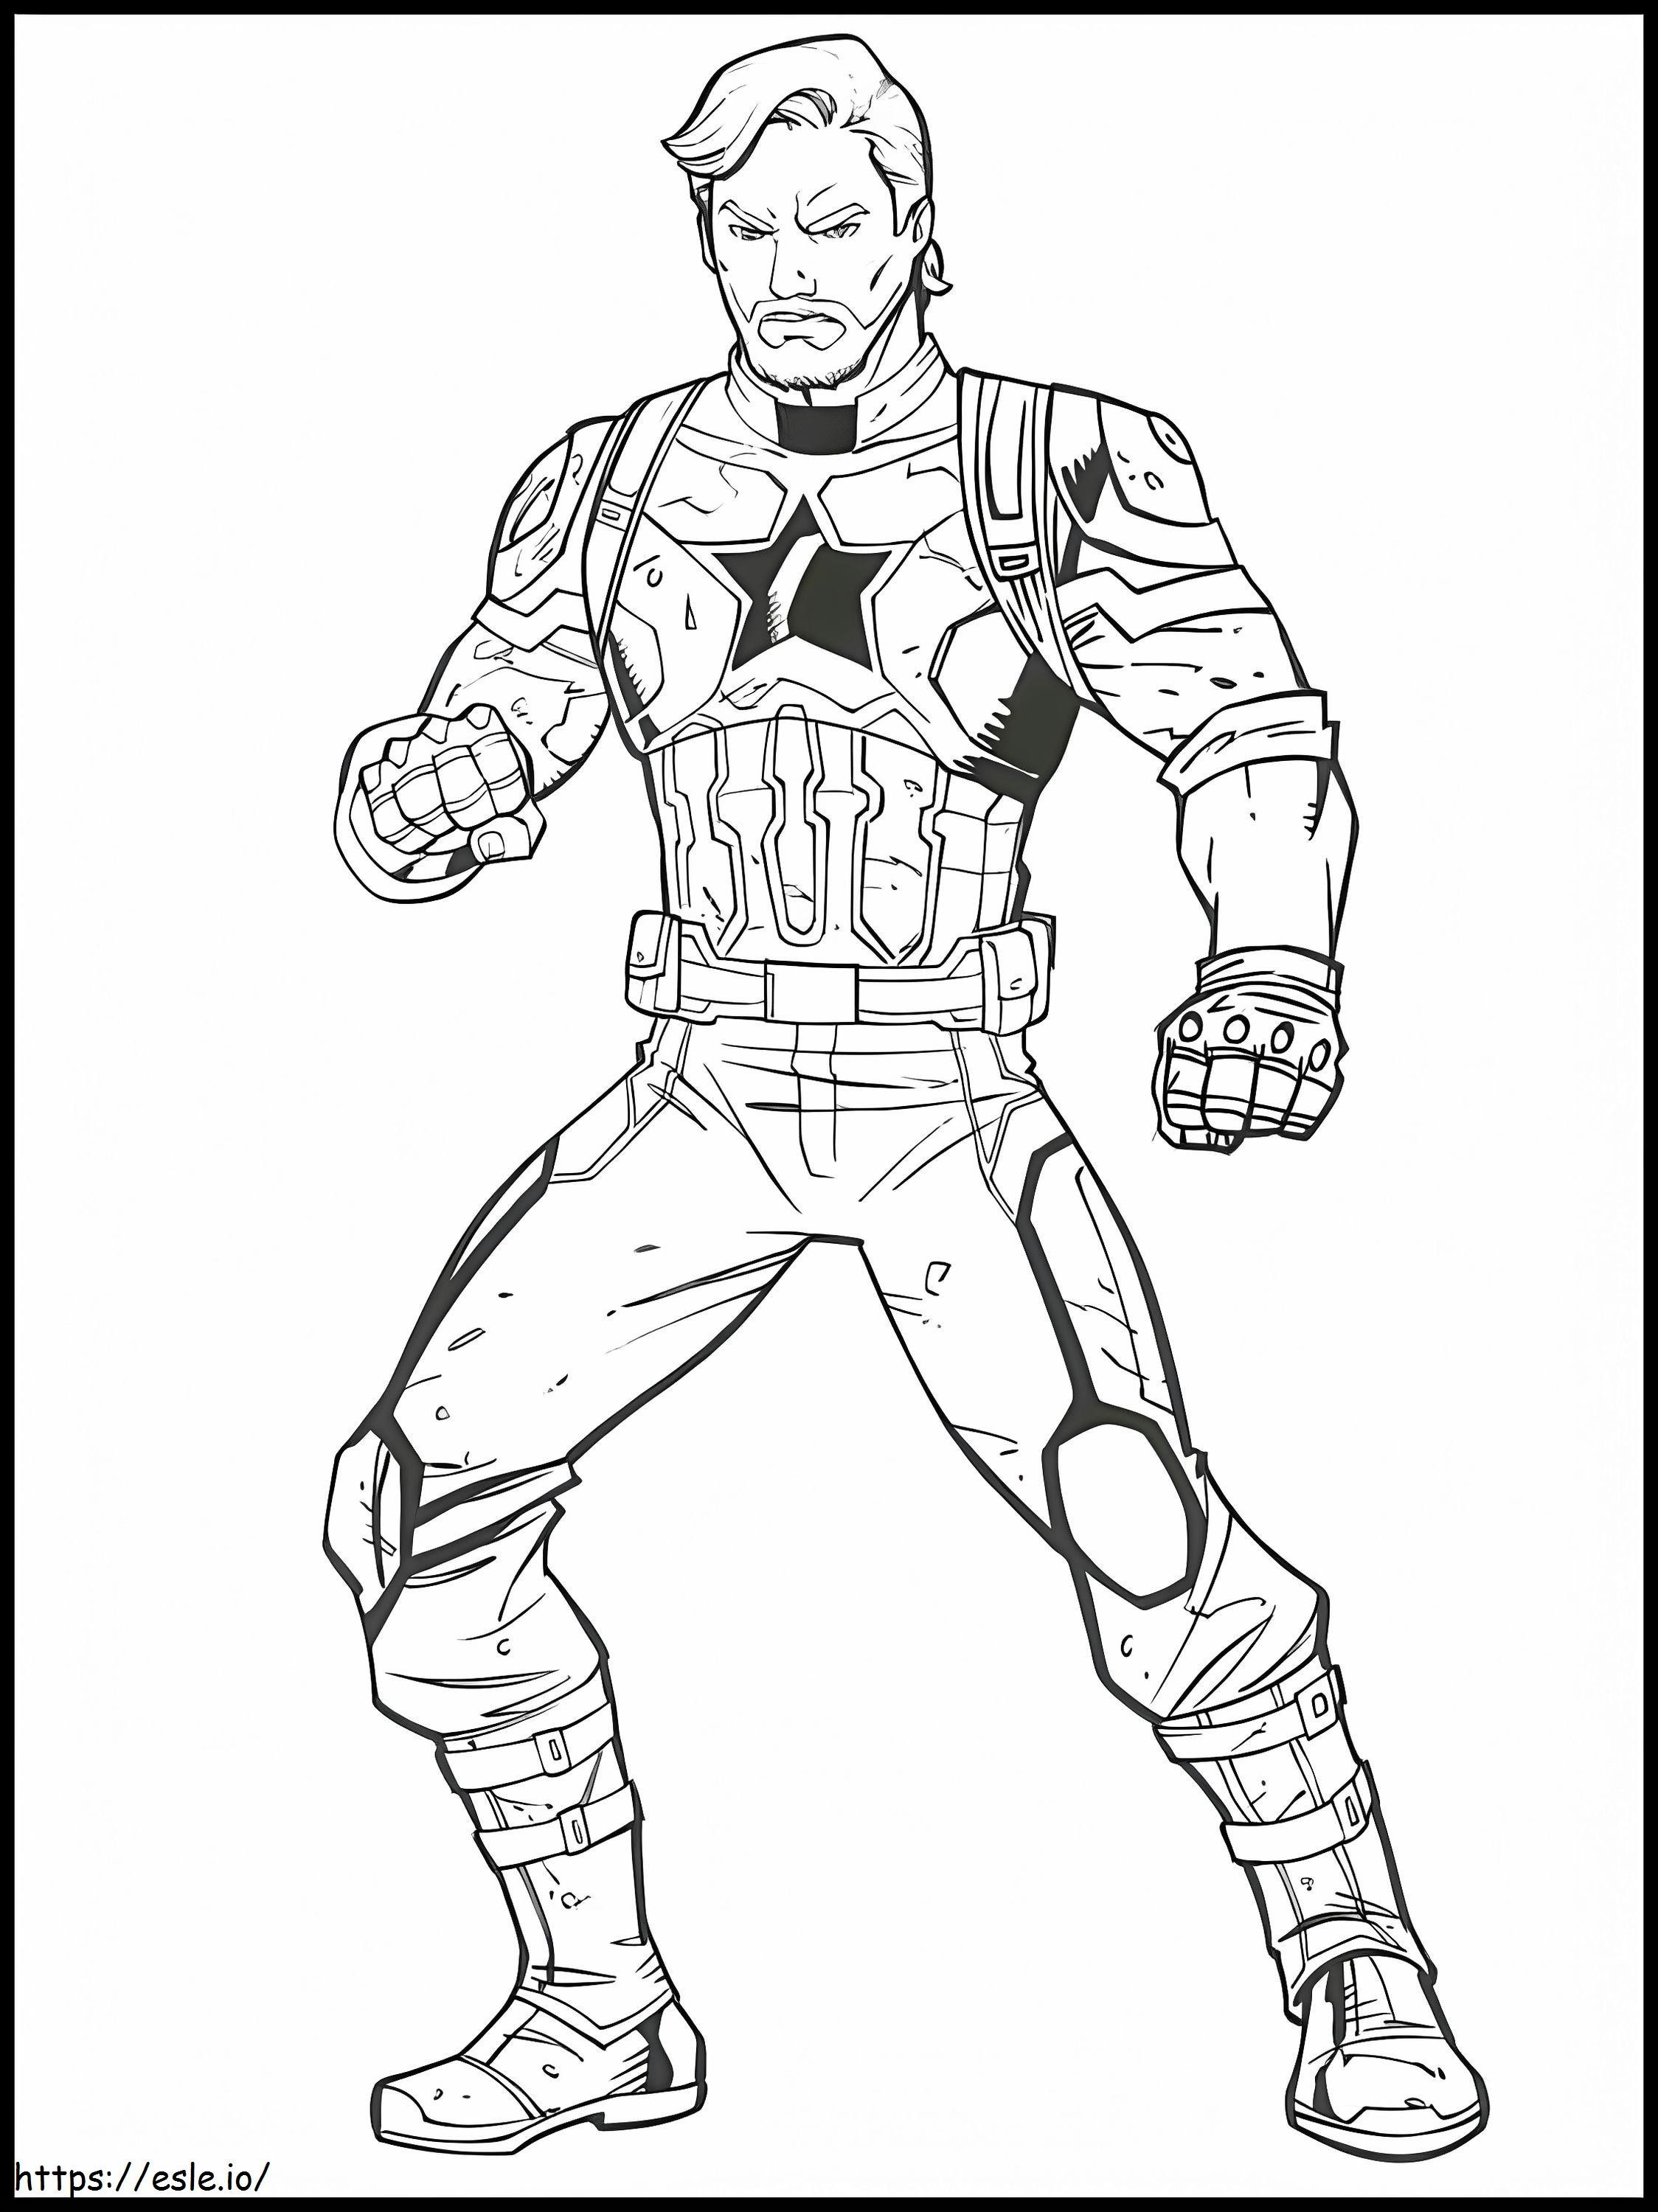 Avenger Endgame Captain America By Chris Evans coloring page